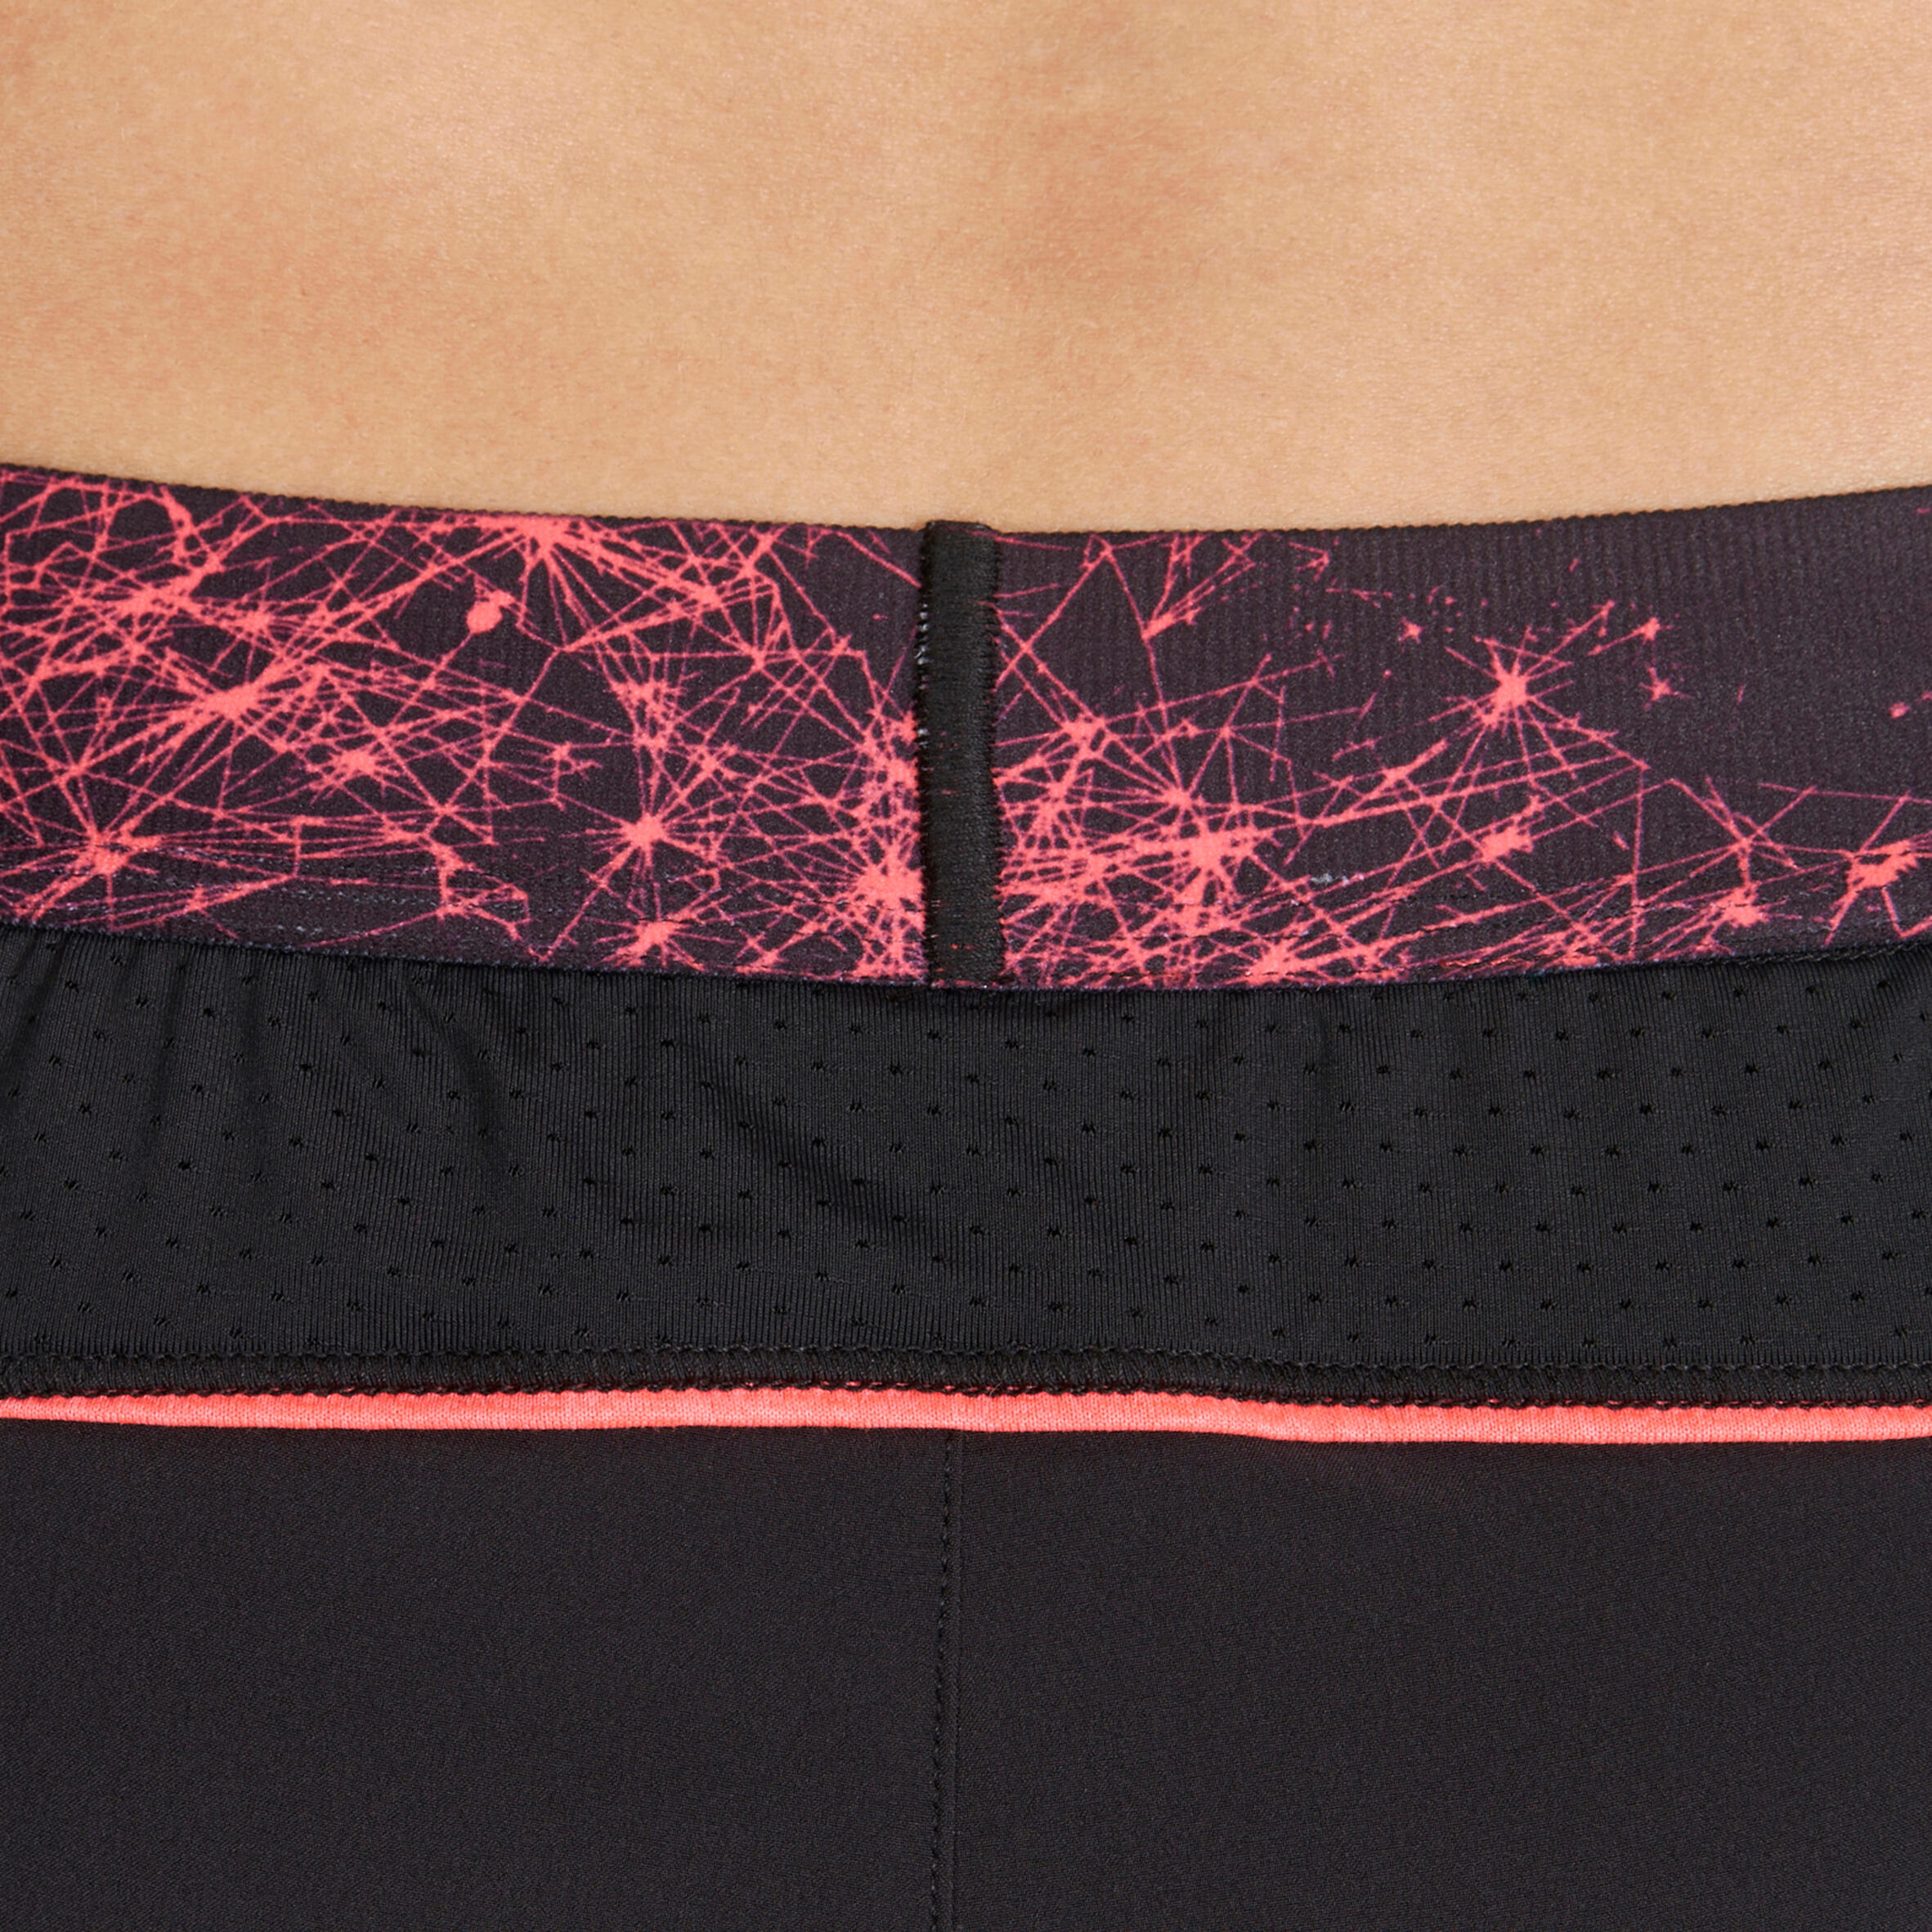 Energy Xtreme Women's 2-in-1 Fitness Shorts - Black/Printed Waistband 10/13